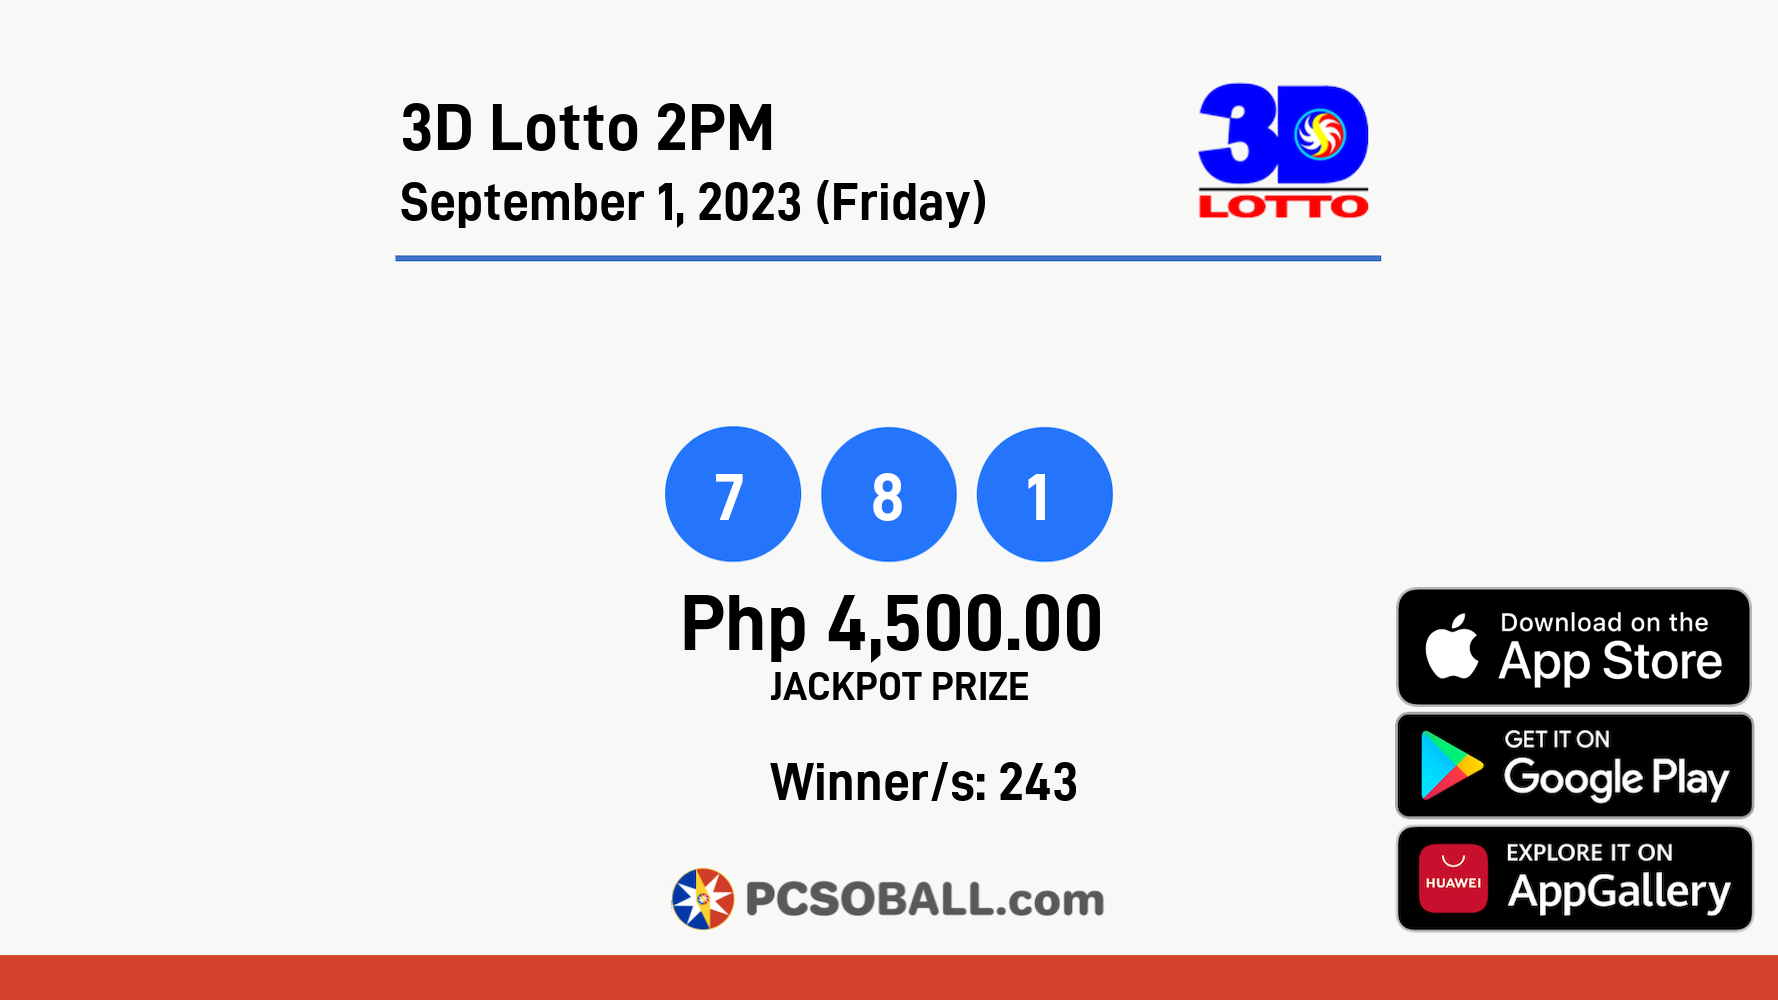 3D Lotto 2PM September 1, 2023 (Friday) Result